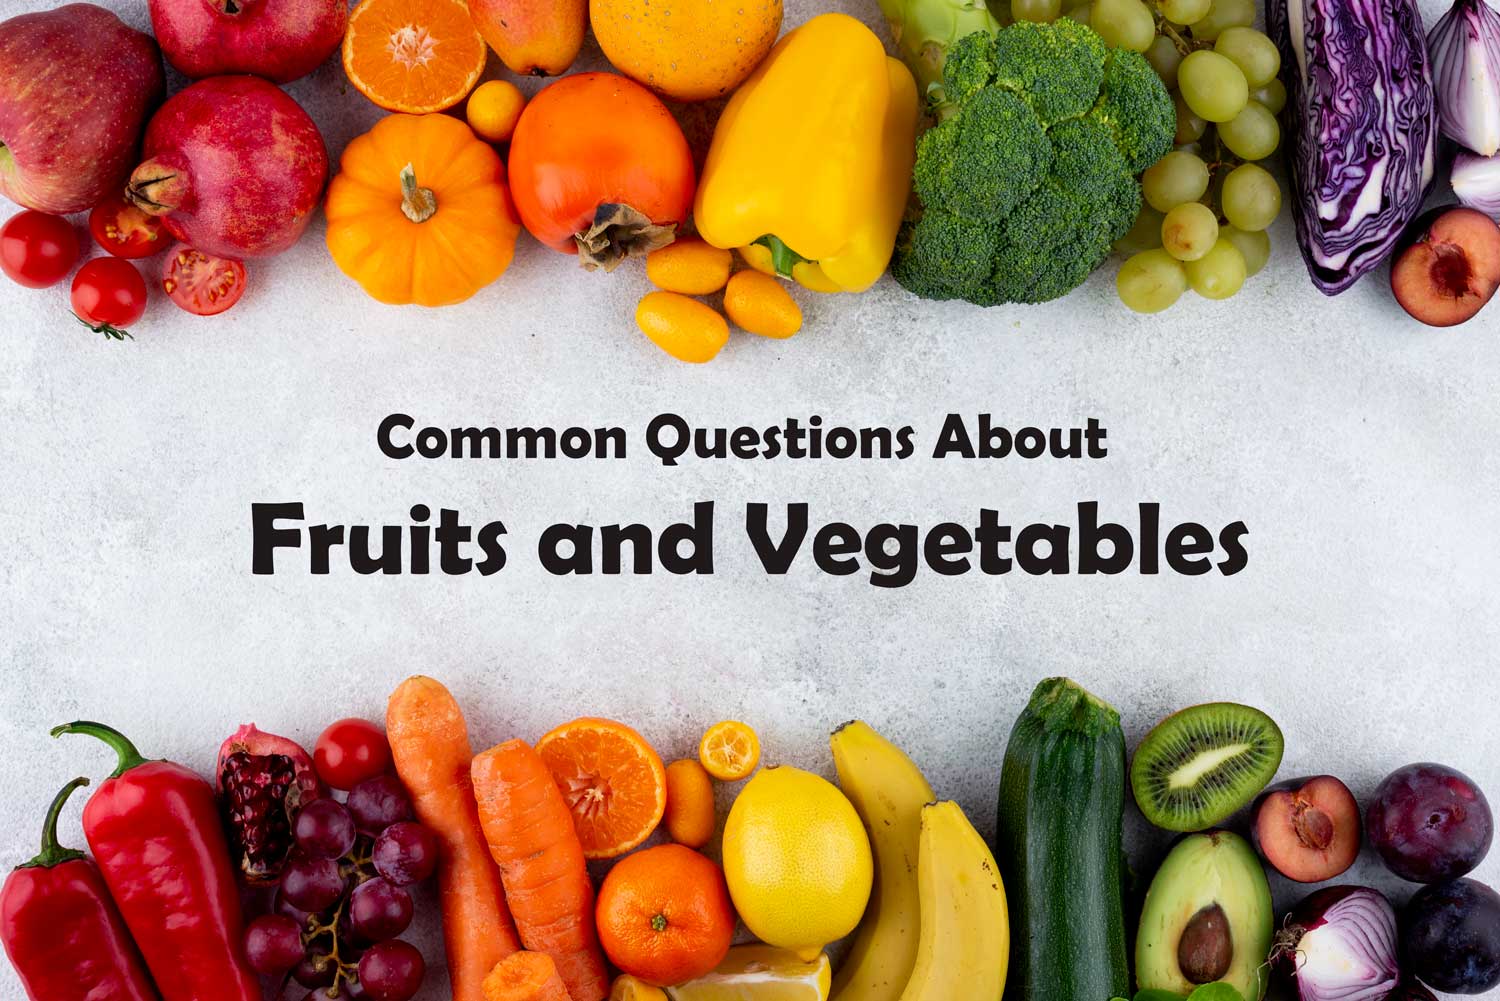 Common Questions About Fruits and Vegetables